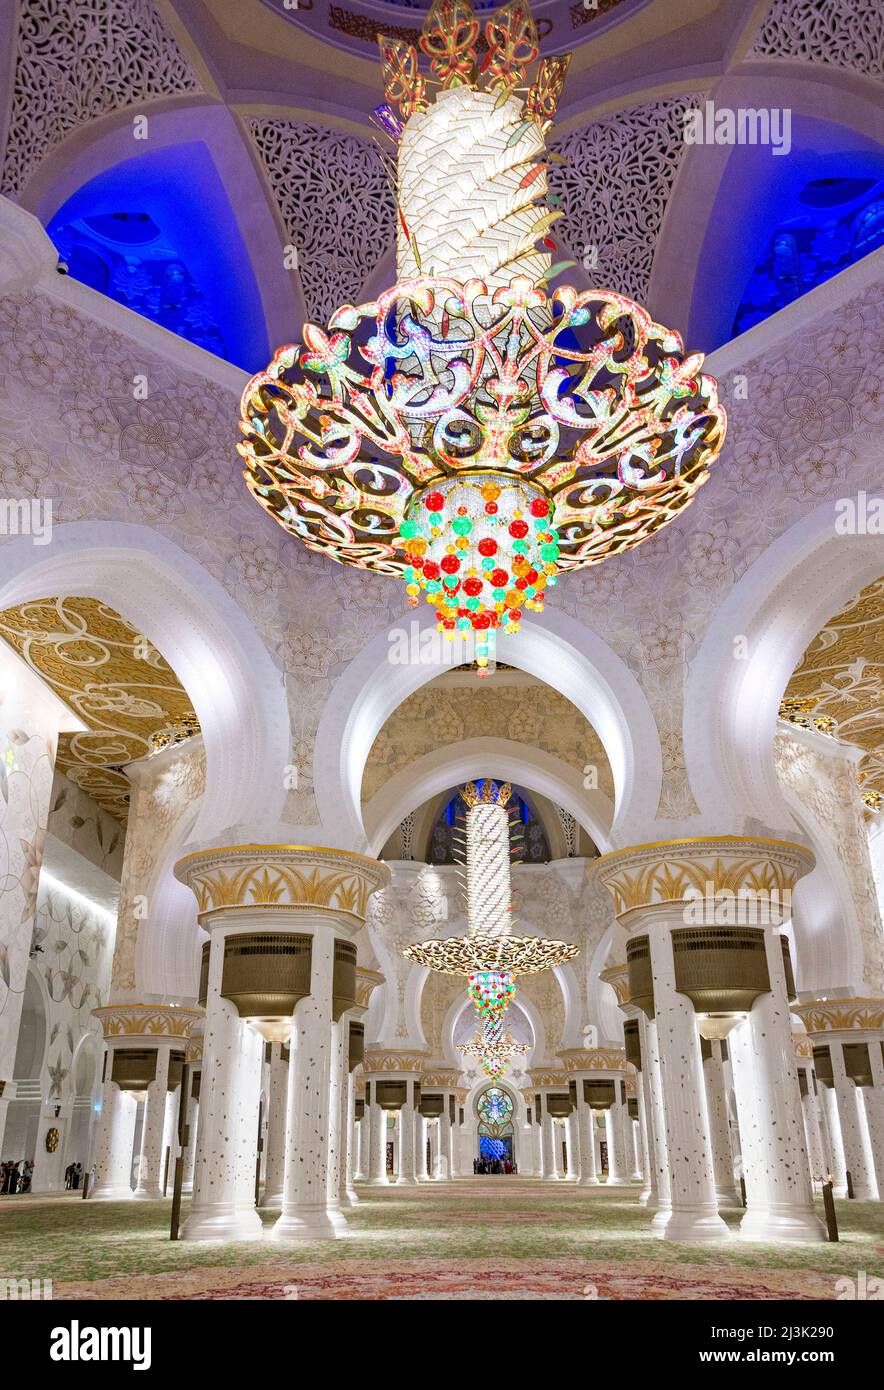 Looking into the main prayer room of the Grand Mosque in Abu Dhabi, UAE, with its Swarovski Crystal chandeliers. It is also the world’s largest car... Stock Photo